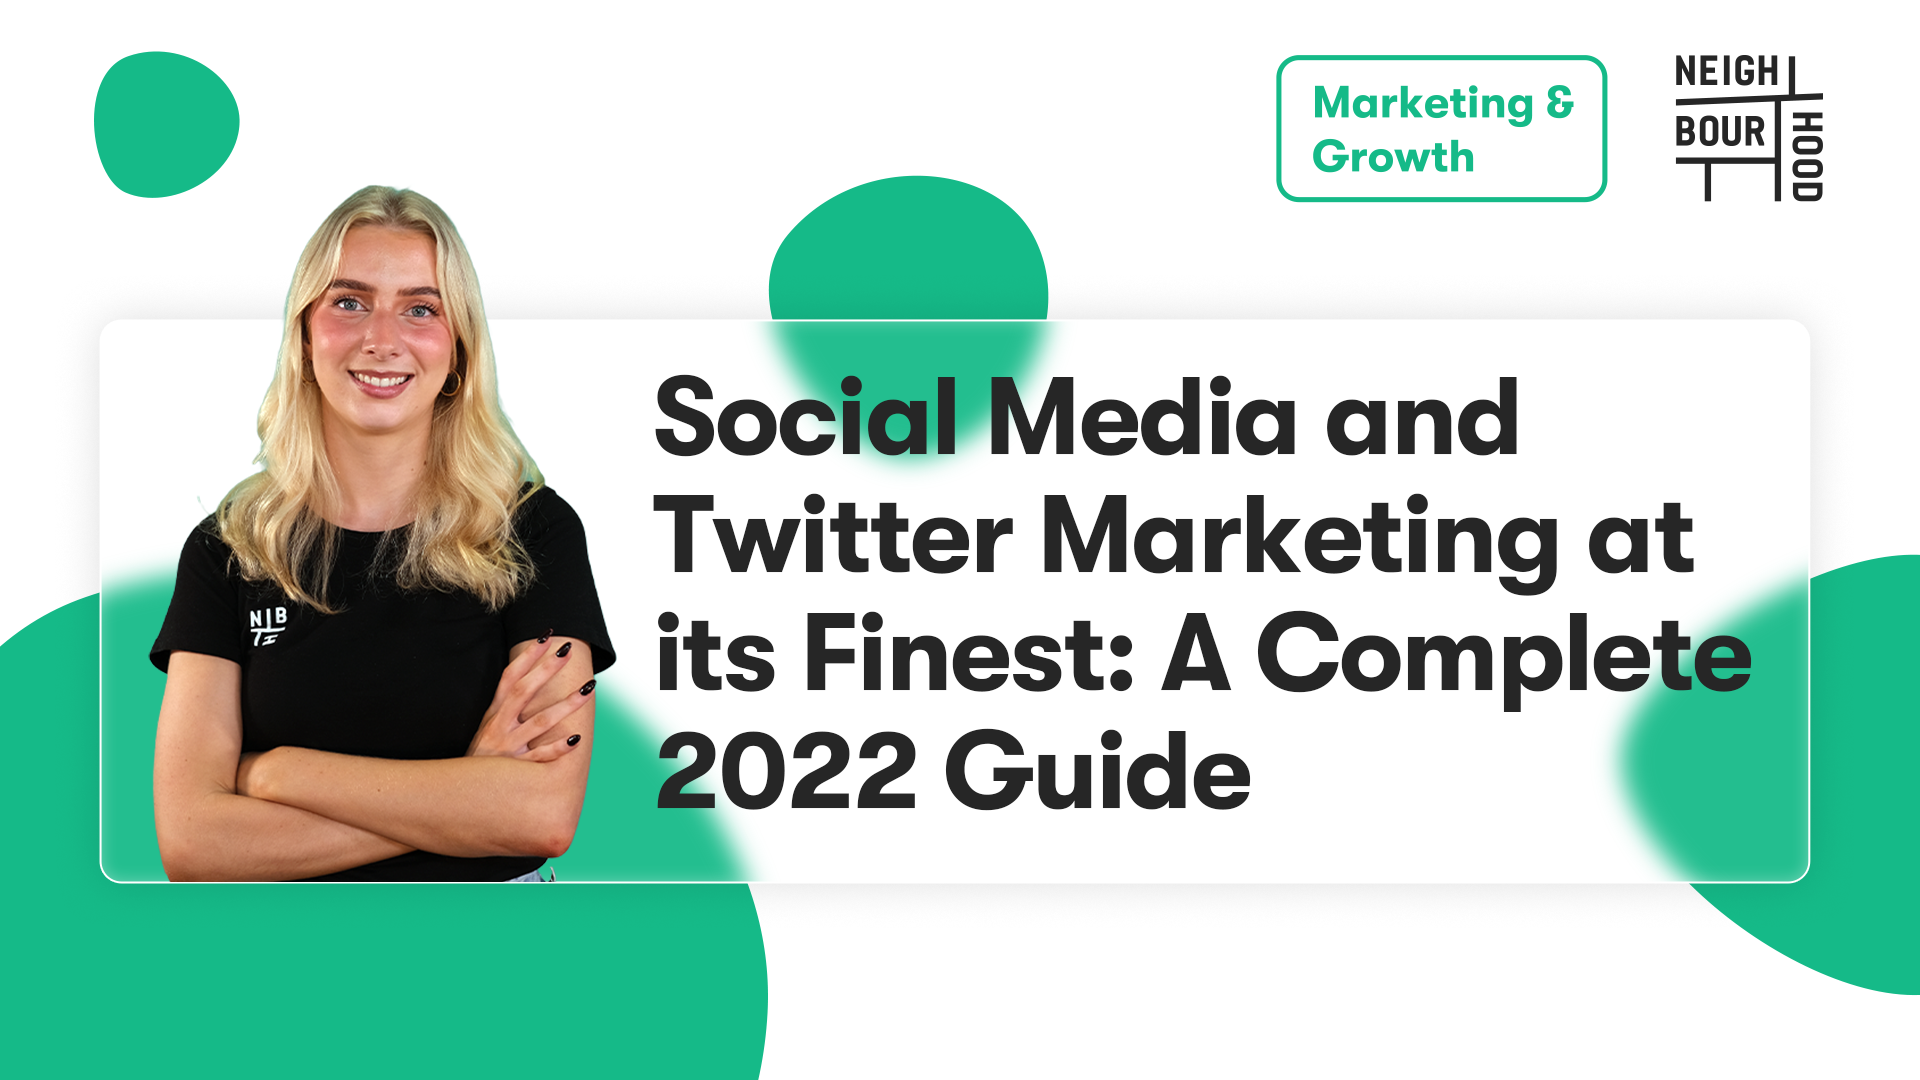 https://www.nbh.co/hubfs/Social%20Media%20and%20Twitter%20Marketing%20at%20its%20Finest%20A%20Complete%202022%20Guide.png